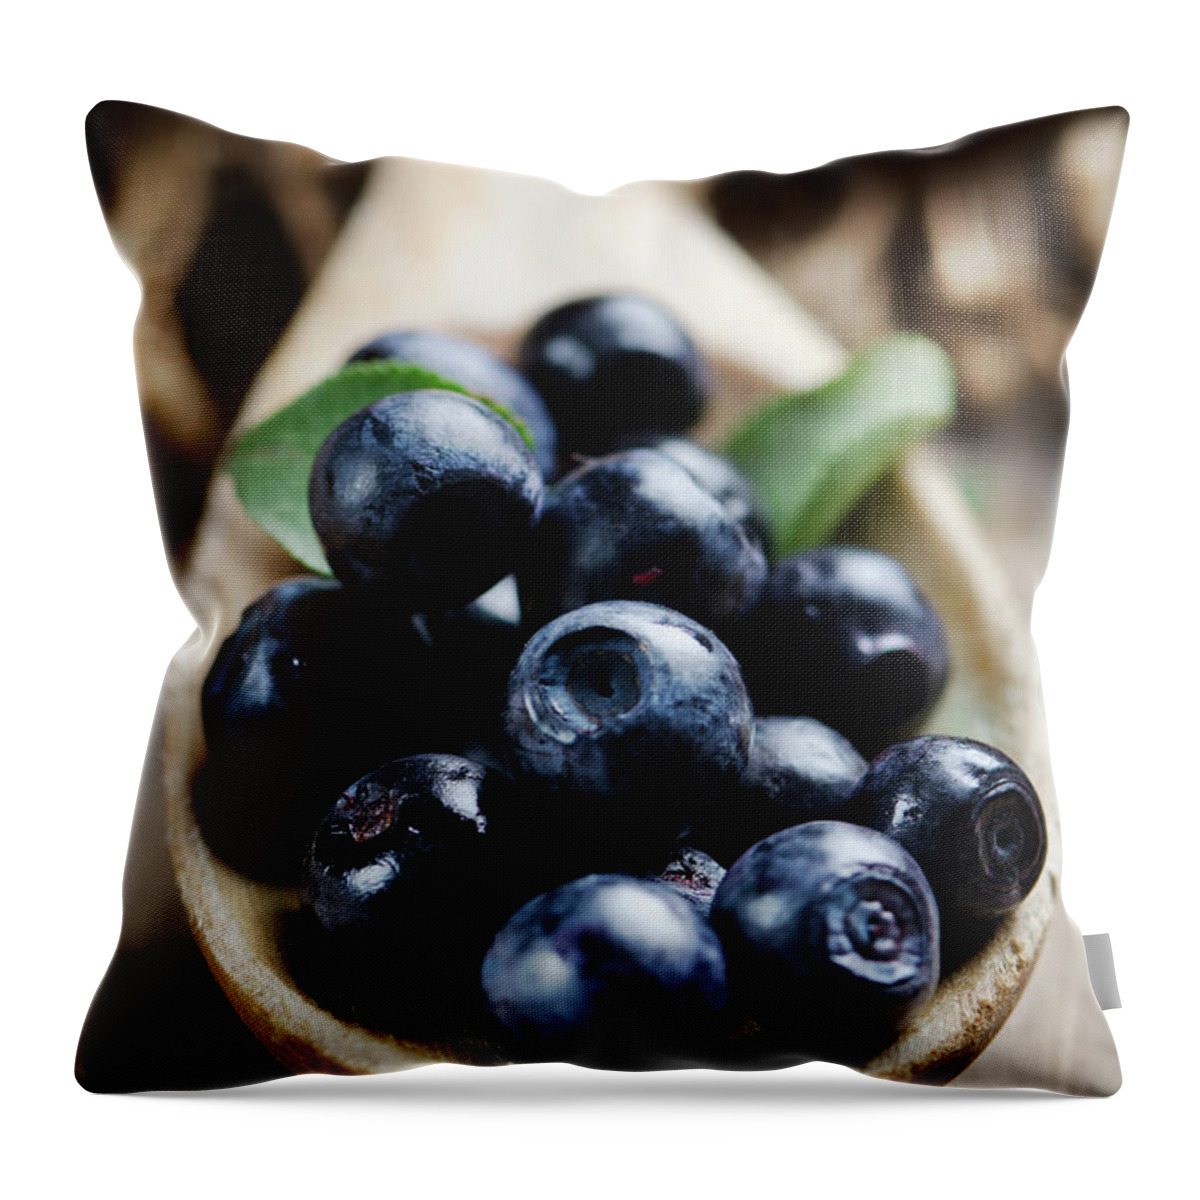 Blueberry Throw Pillow featuring the photograph Blueberry #1 by Jelena Jovanovic